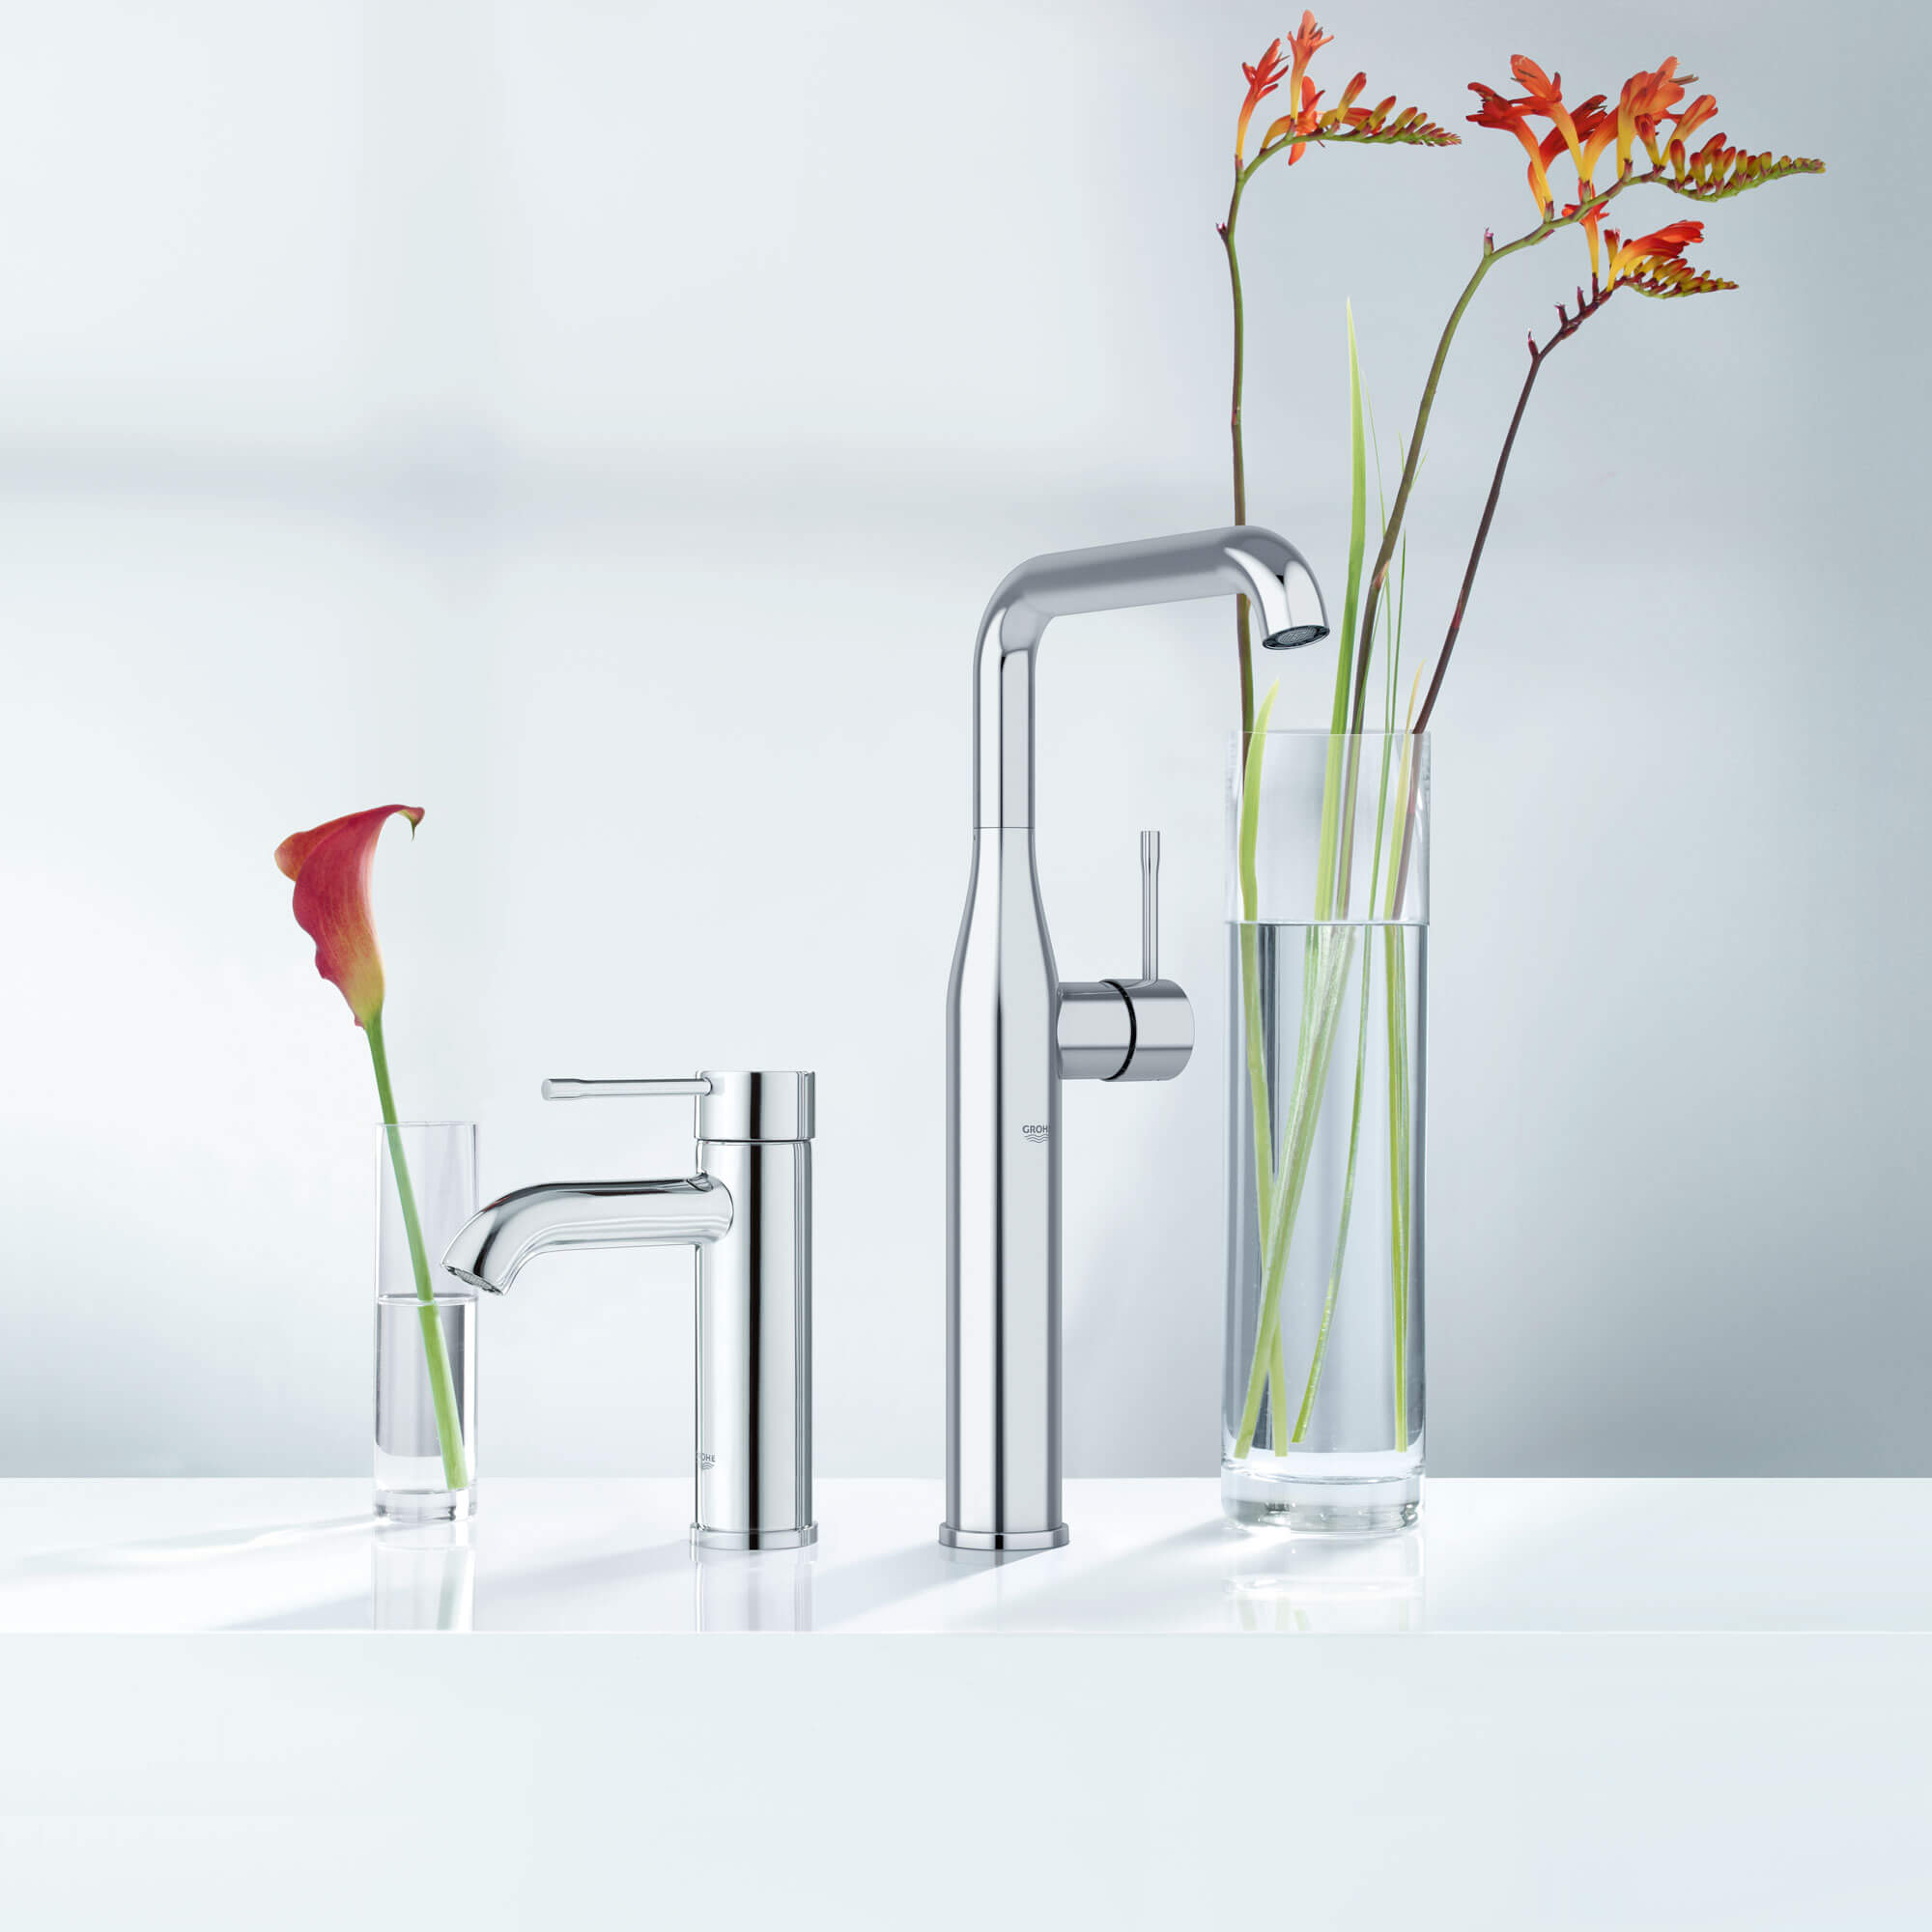 A pair of Grohe faucets next to vases filled with flowers.